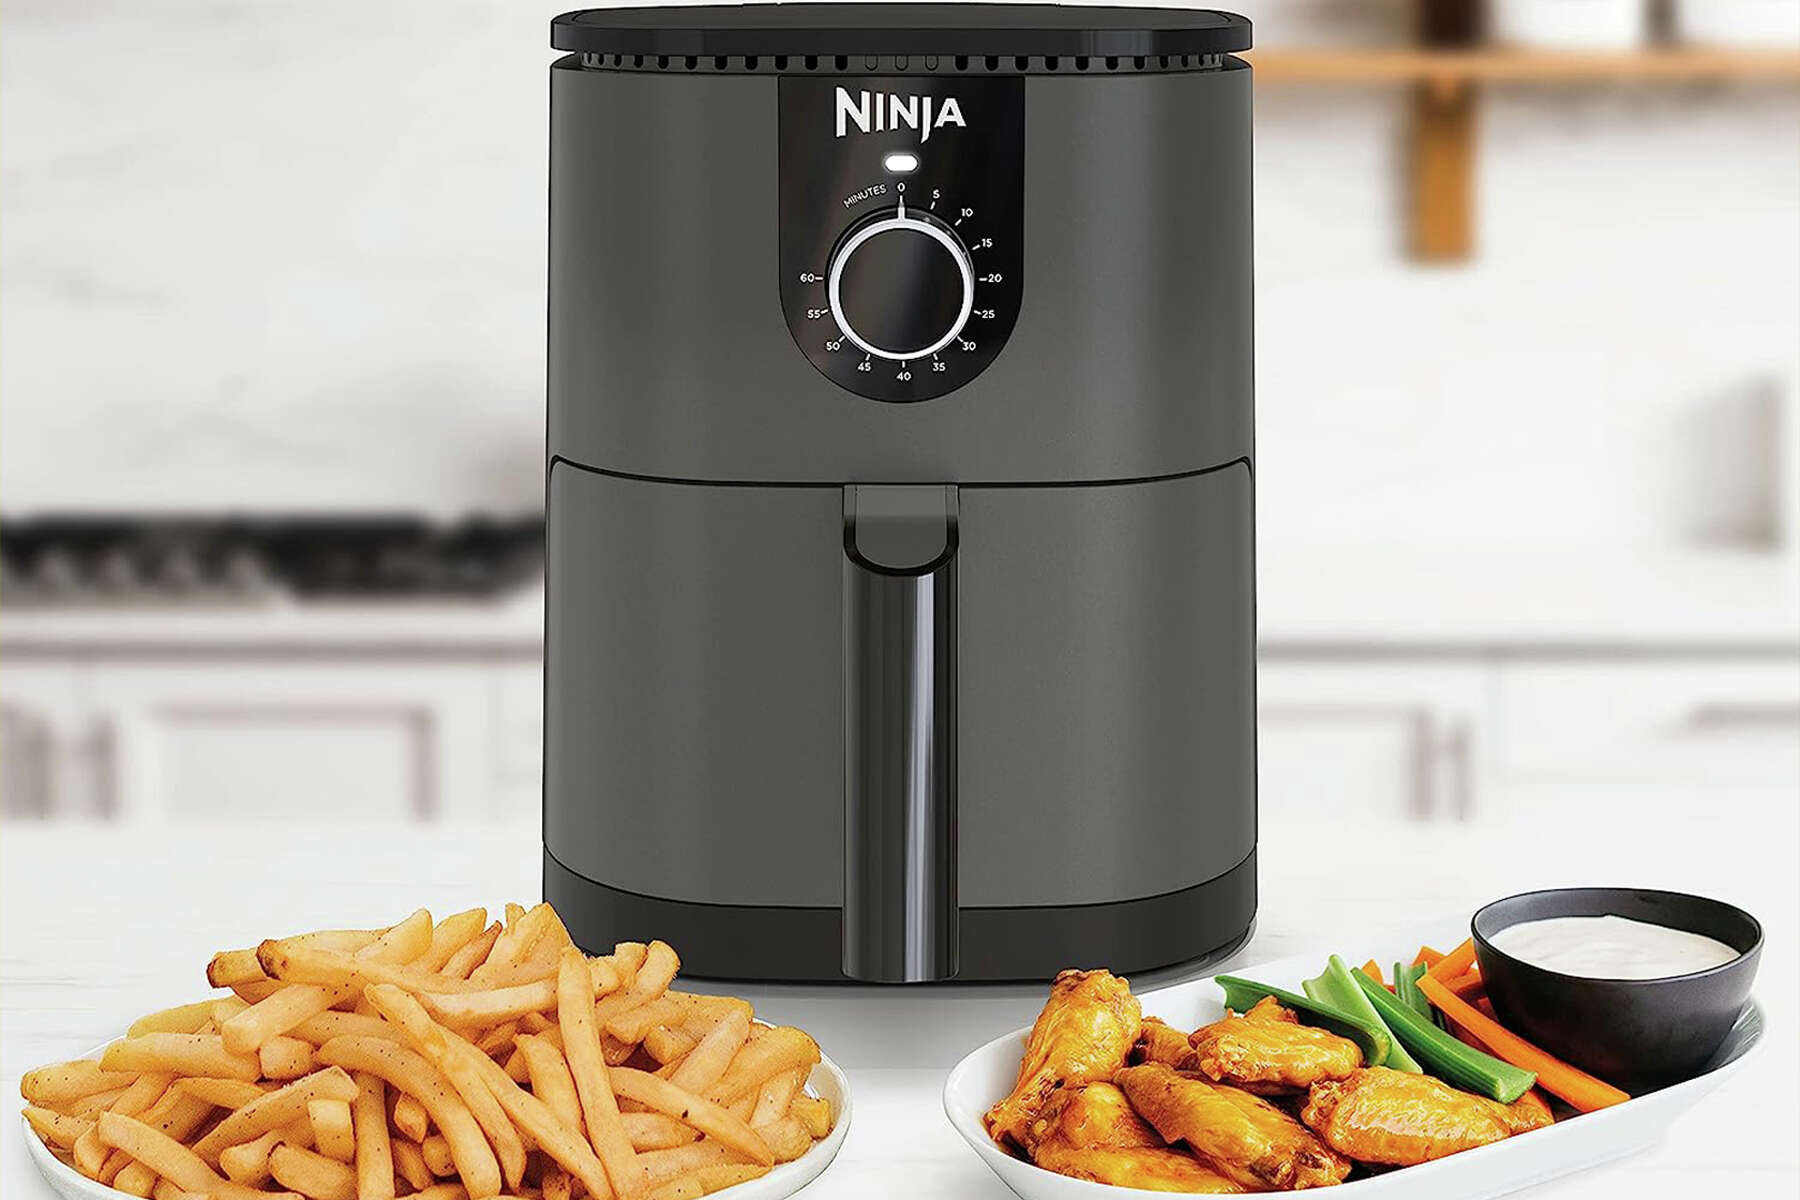 slashed the price of this Ninja Mini Air Fryer by 50%